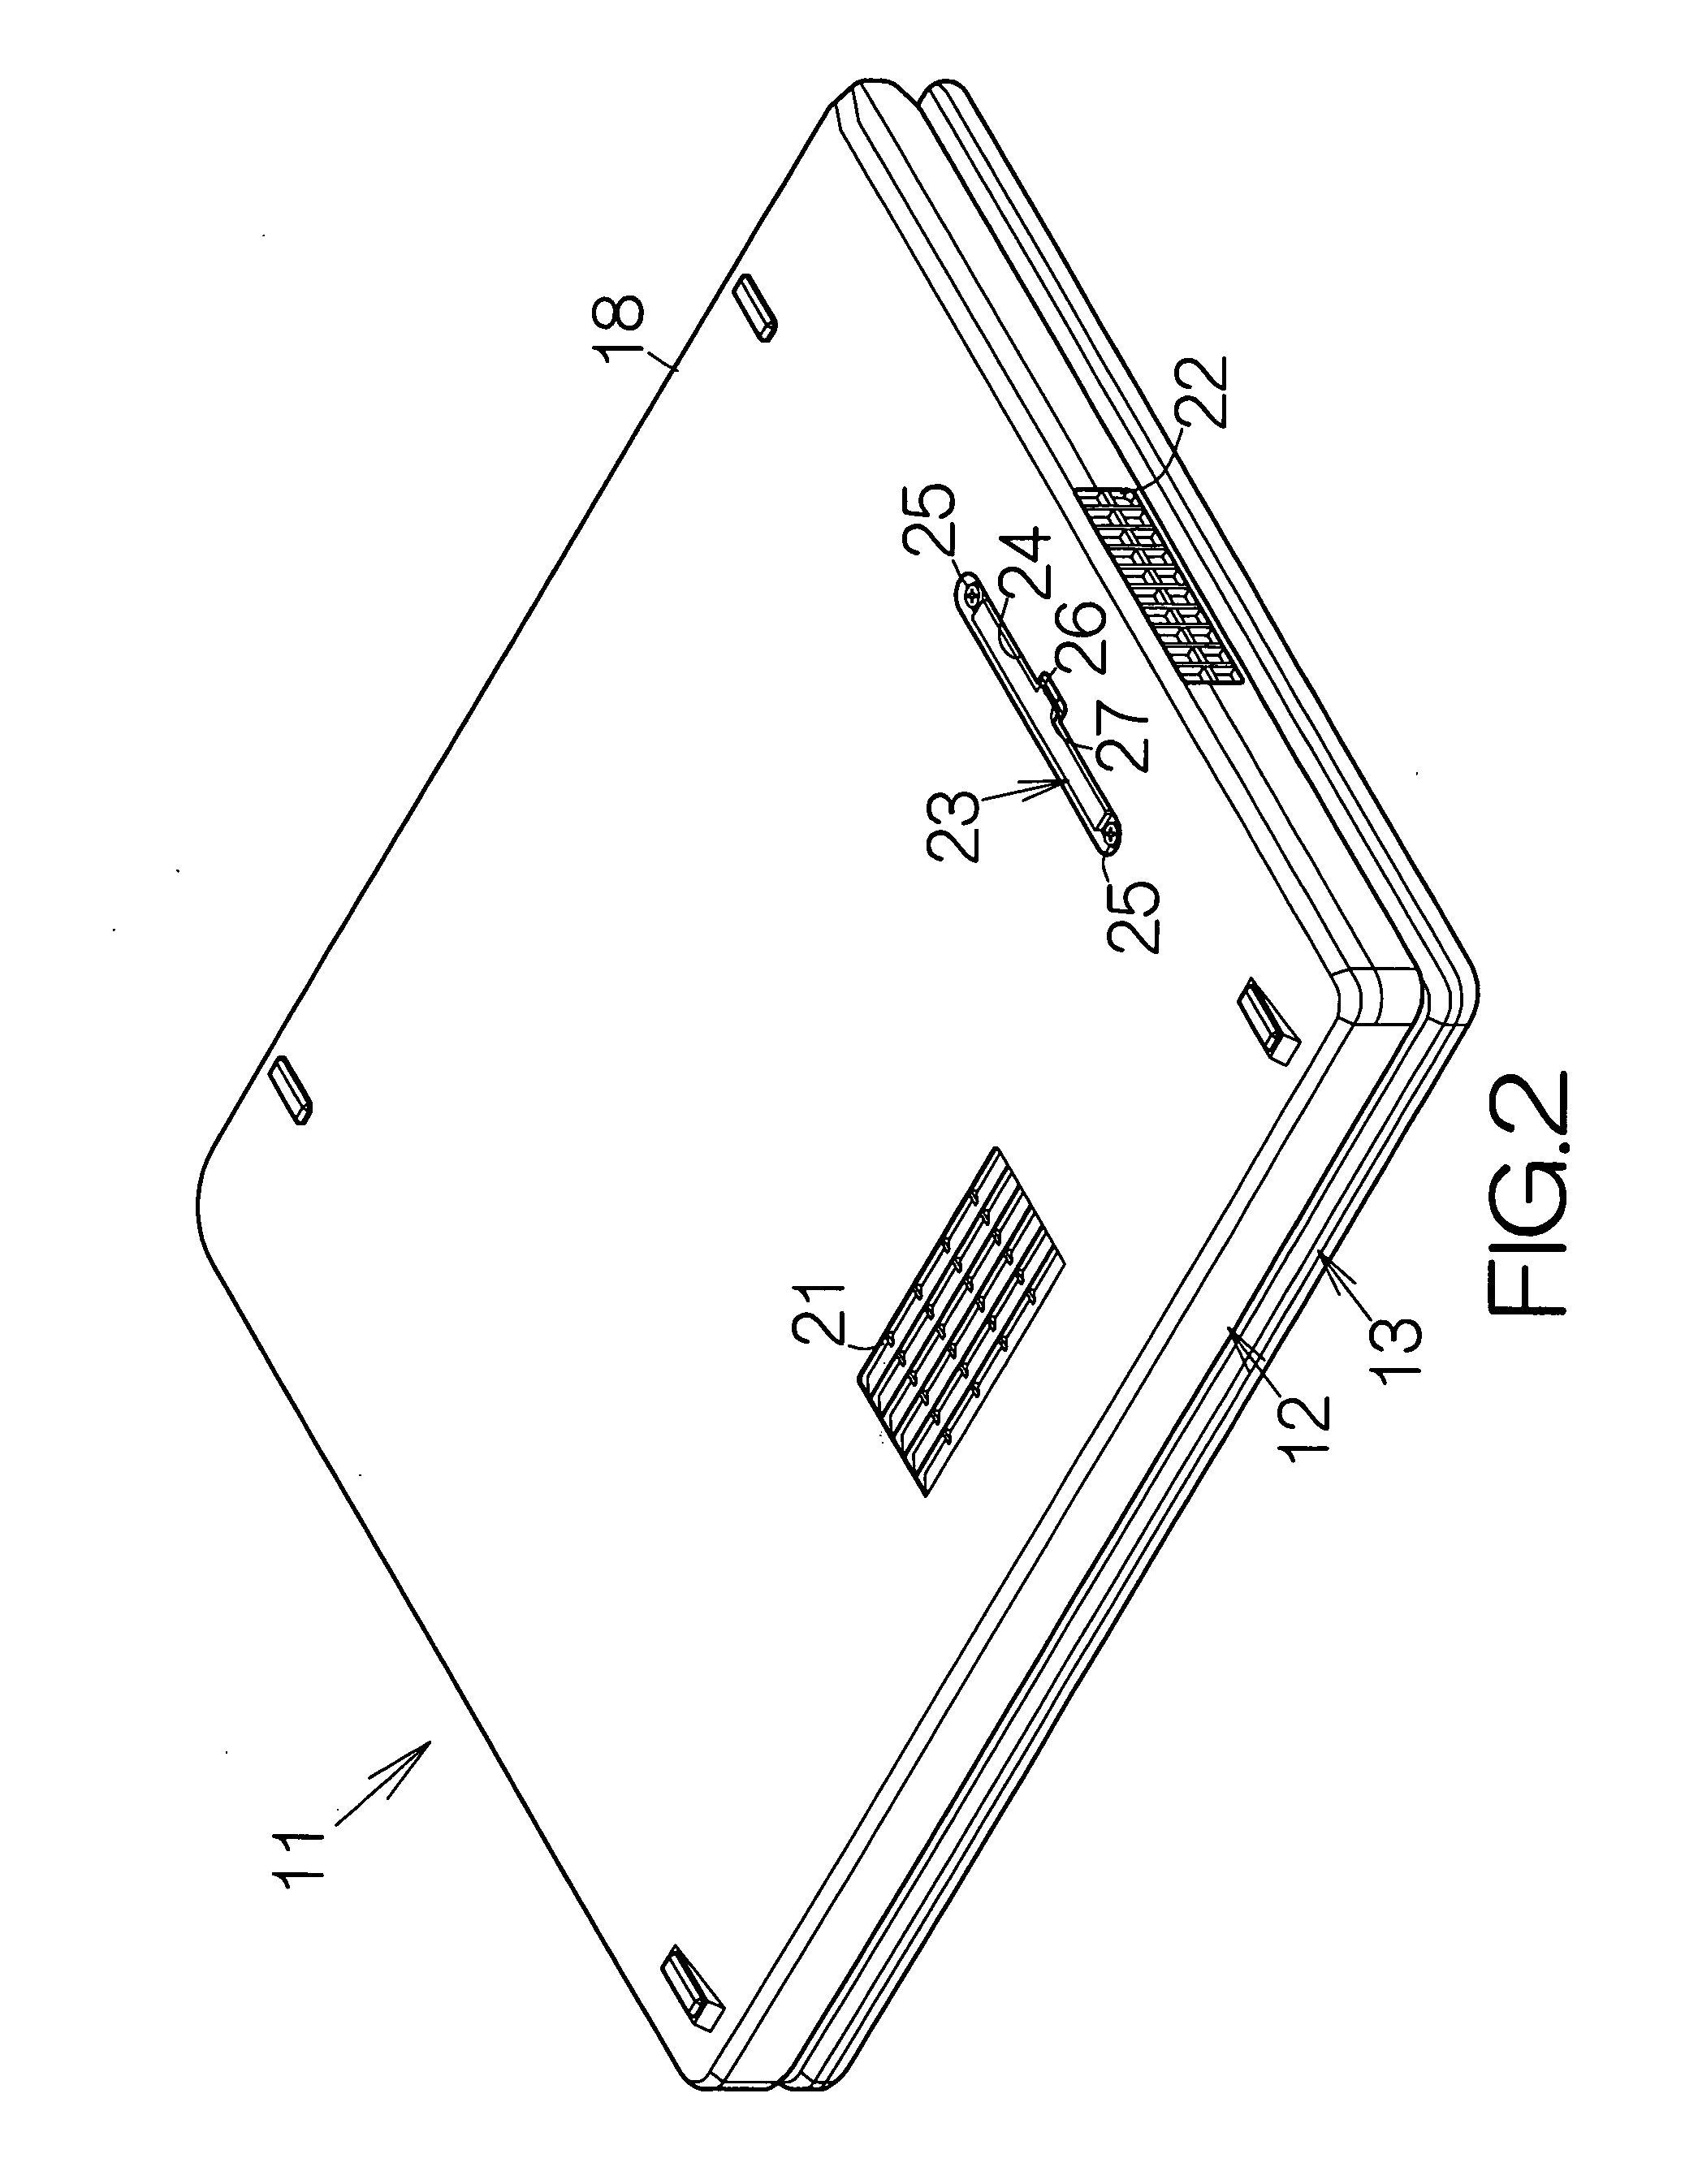 Electronic apparatus including removable dust catcher